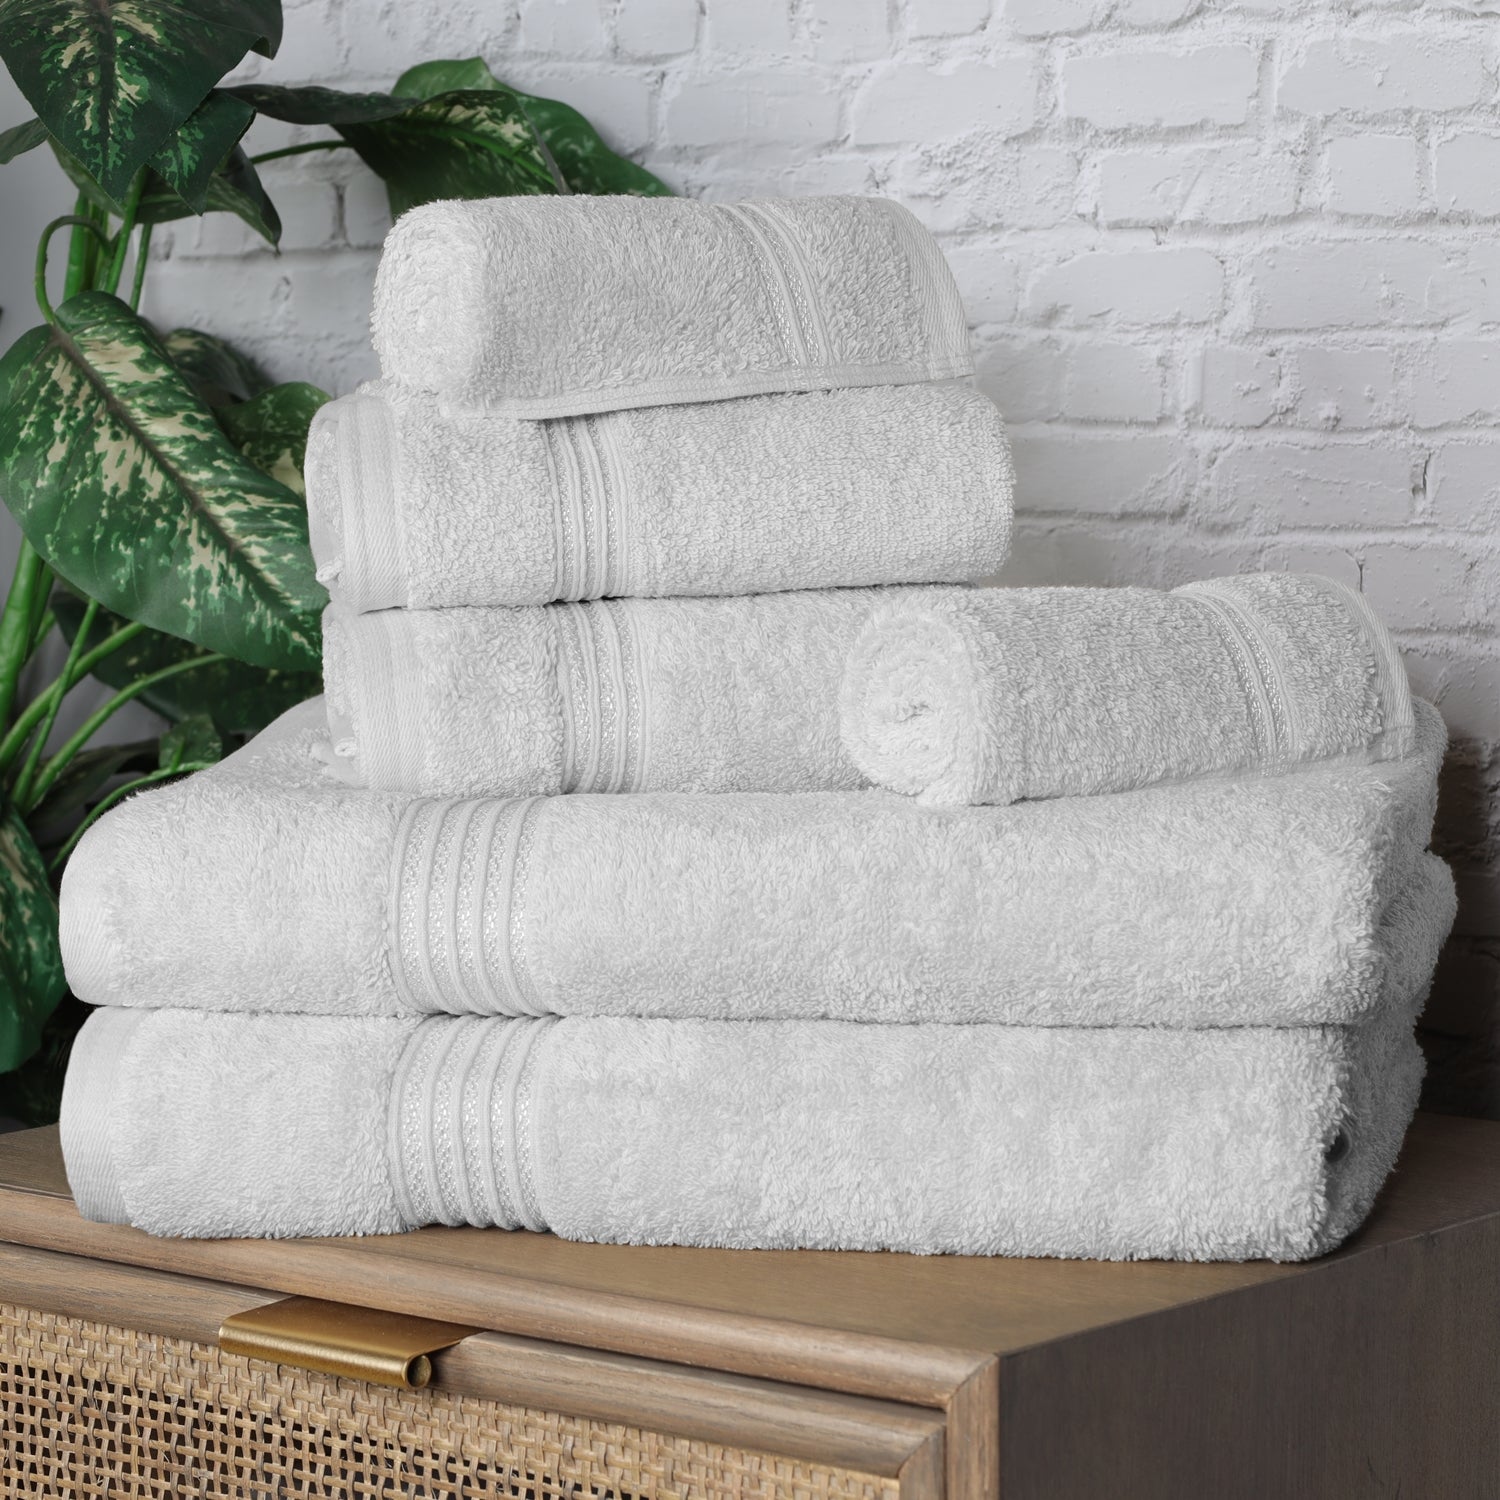 Egyptian Cotton Highly Absorbent Solid Ultra Soft Towel Set - Silver